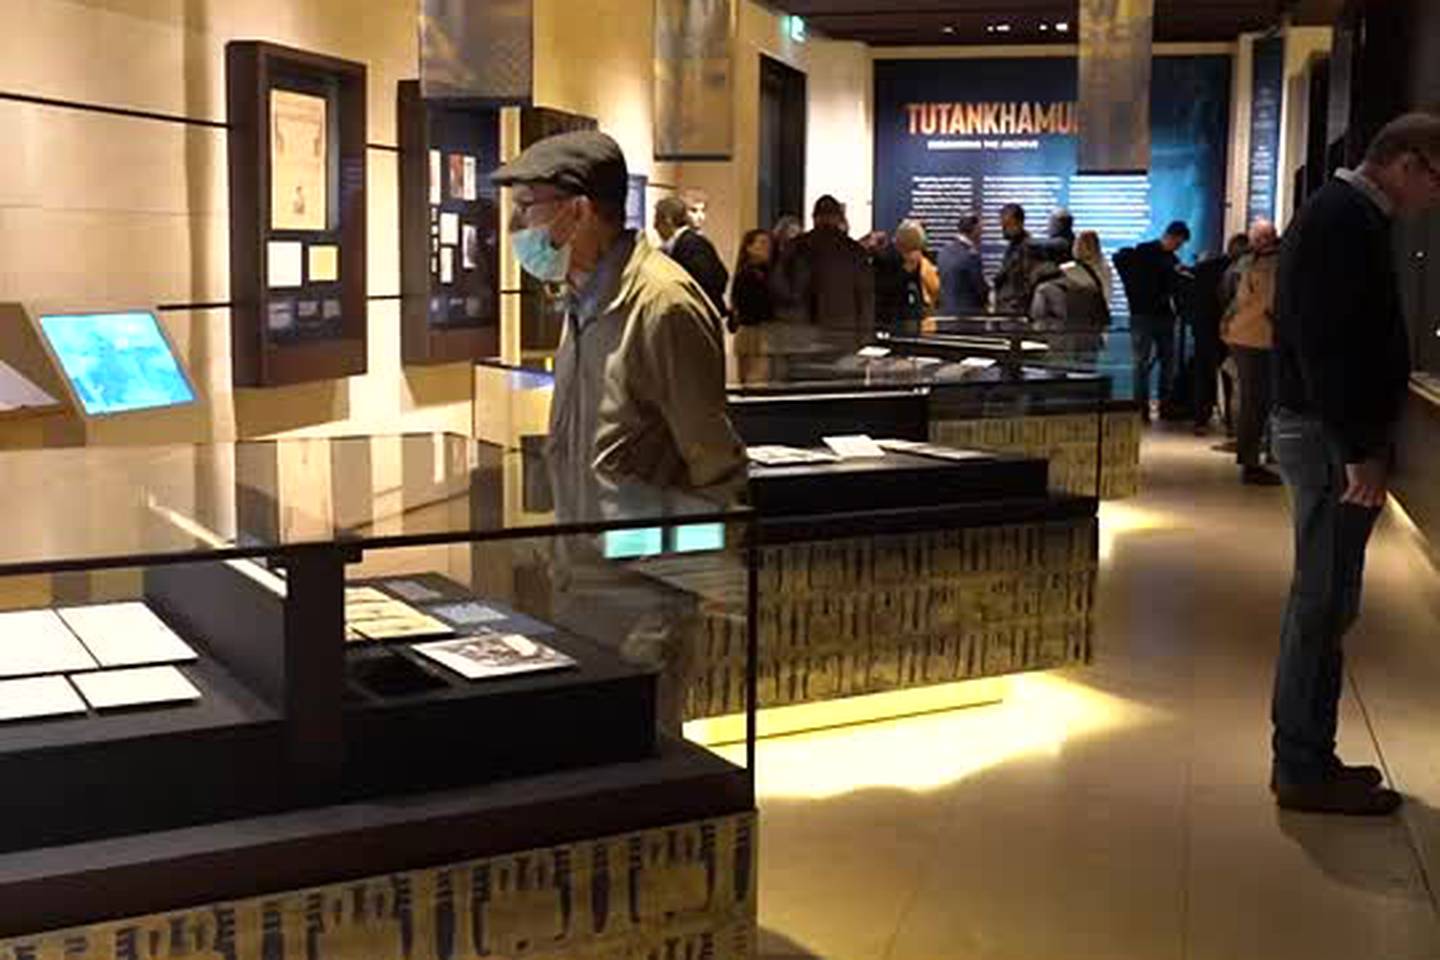 History of the Line of Kings Exhibition